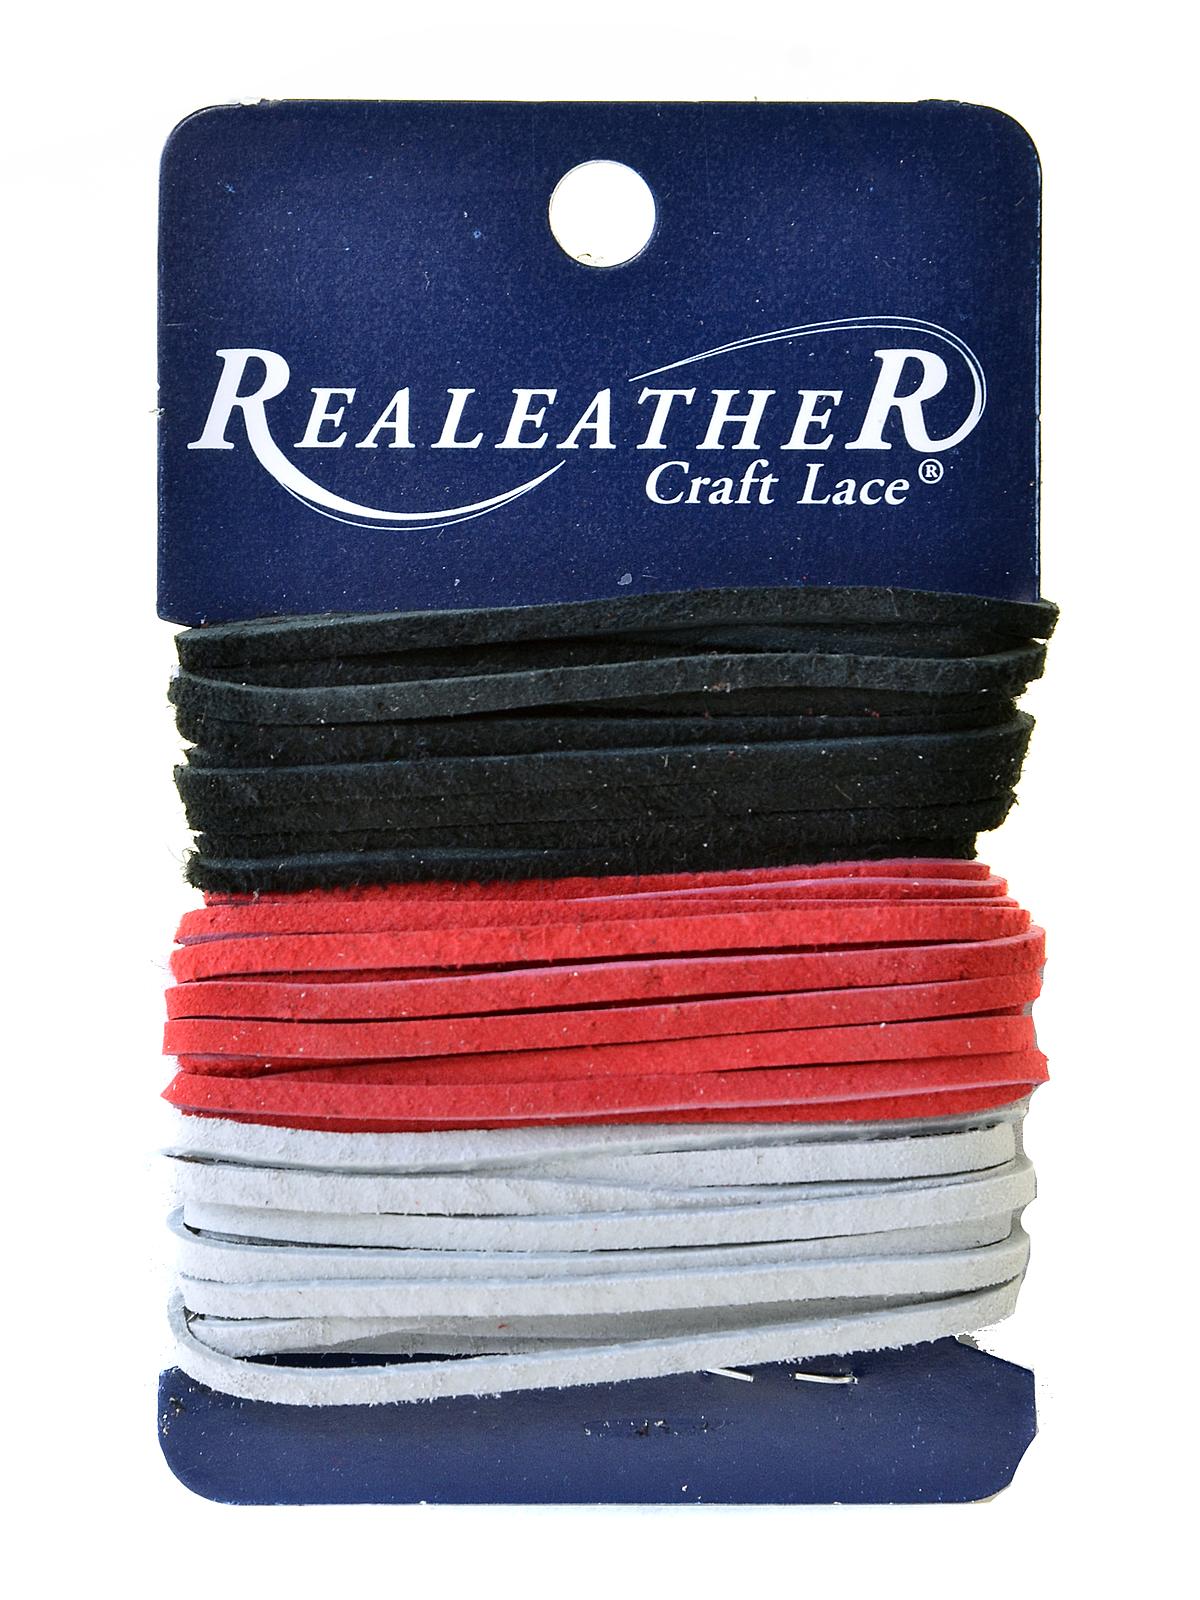 Realeather Sof-suede Lace Value Pack Of 3 3 32 In. X 8 Ft. Pewter, Red, Black